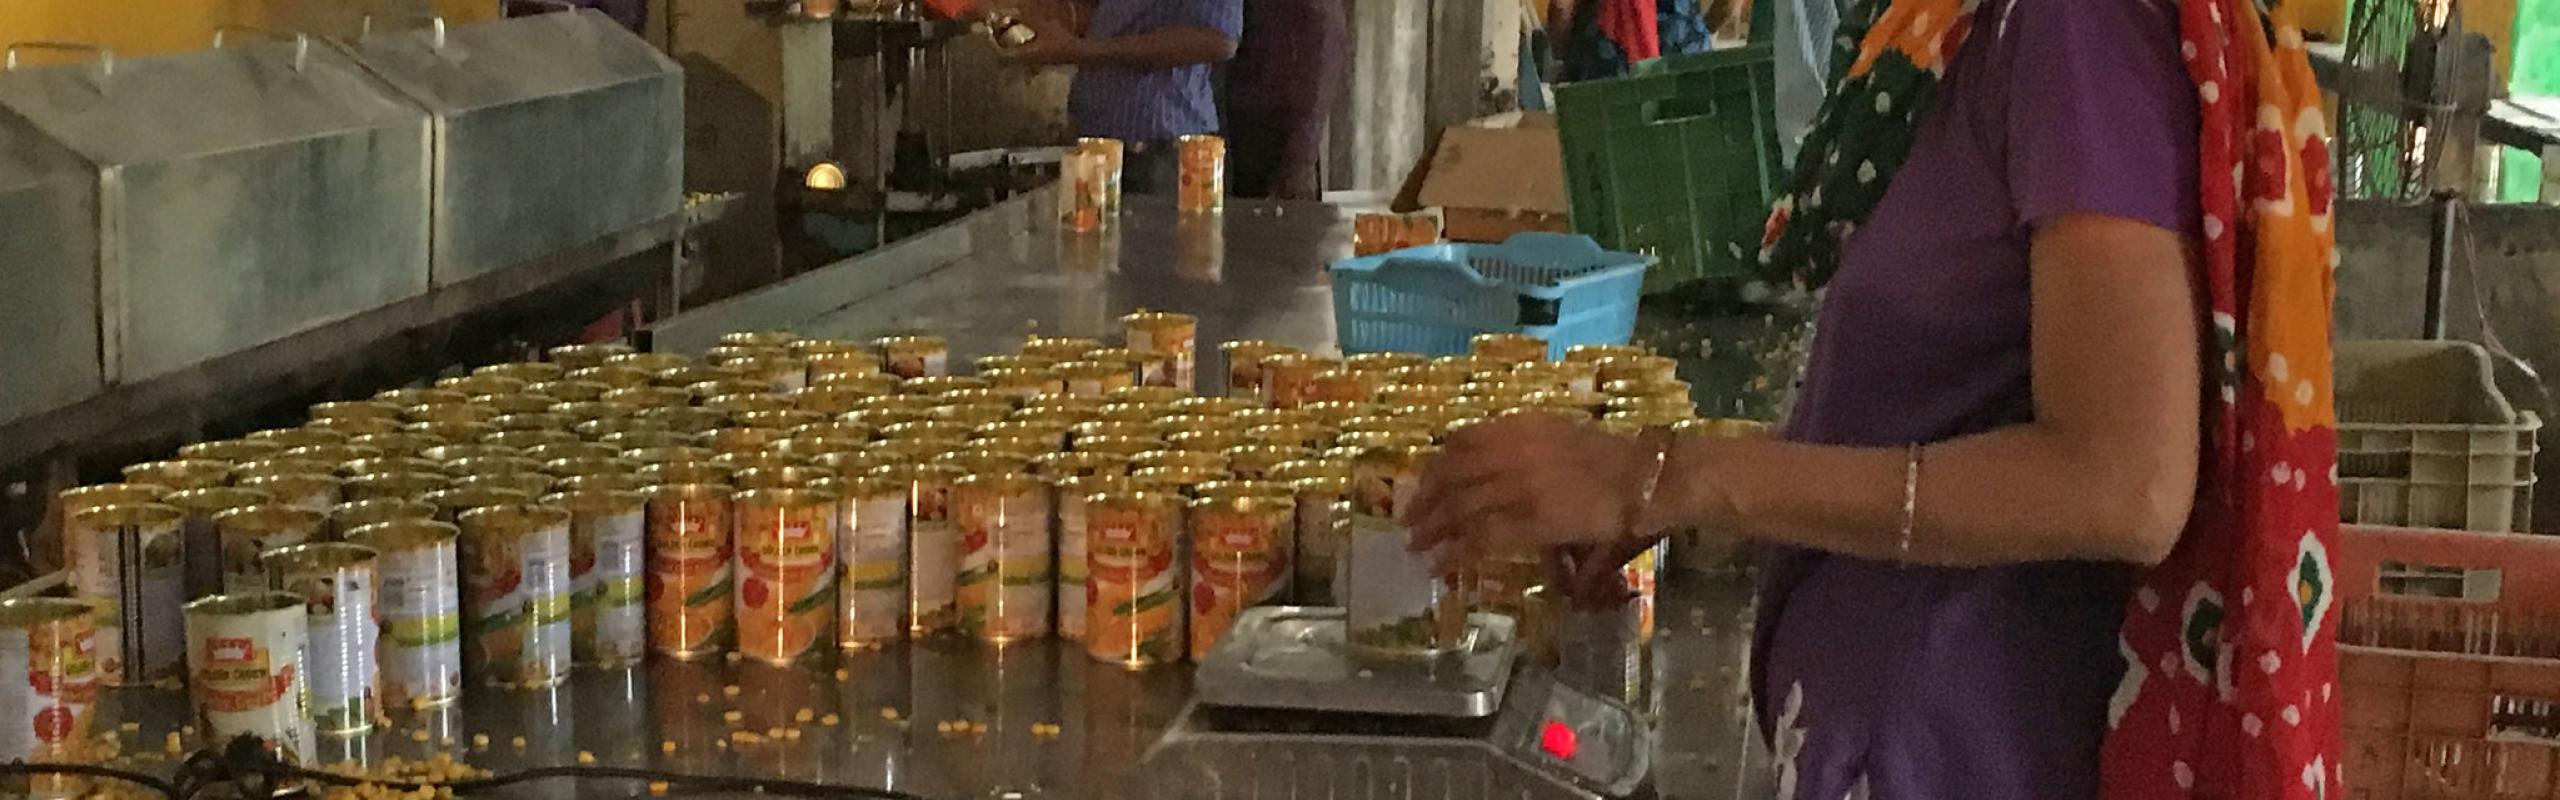 Woman weighing cans of corn for packaging at Pratibha Foods Processing Unit in Sonipat District, Haryana, India.